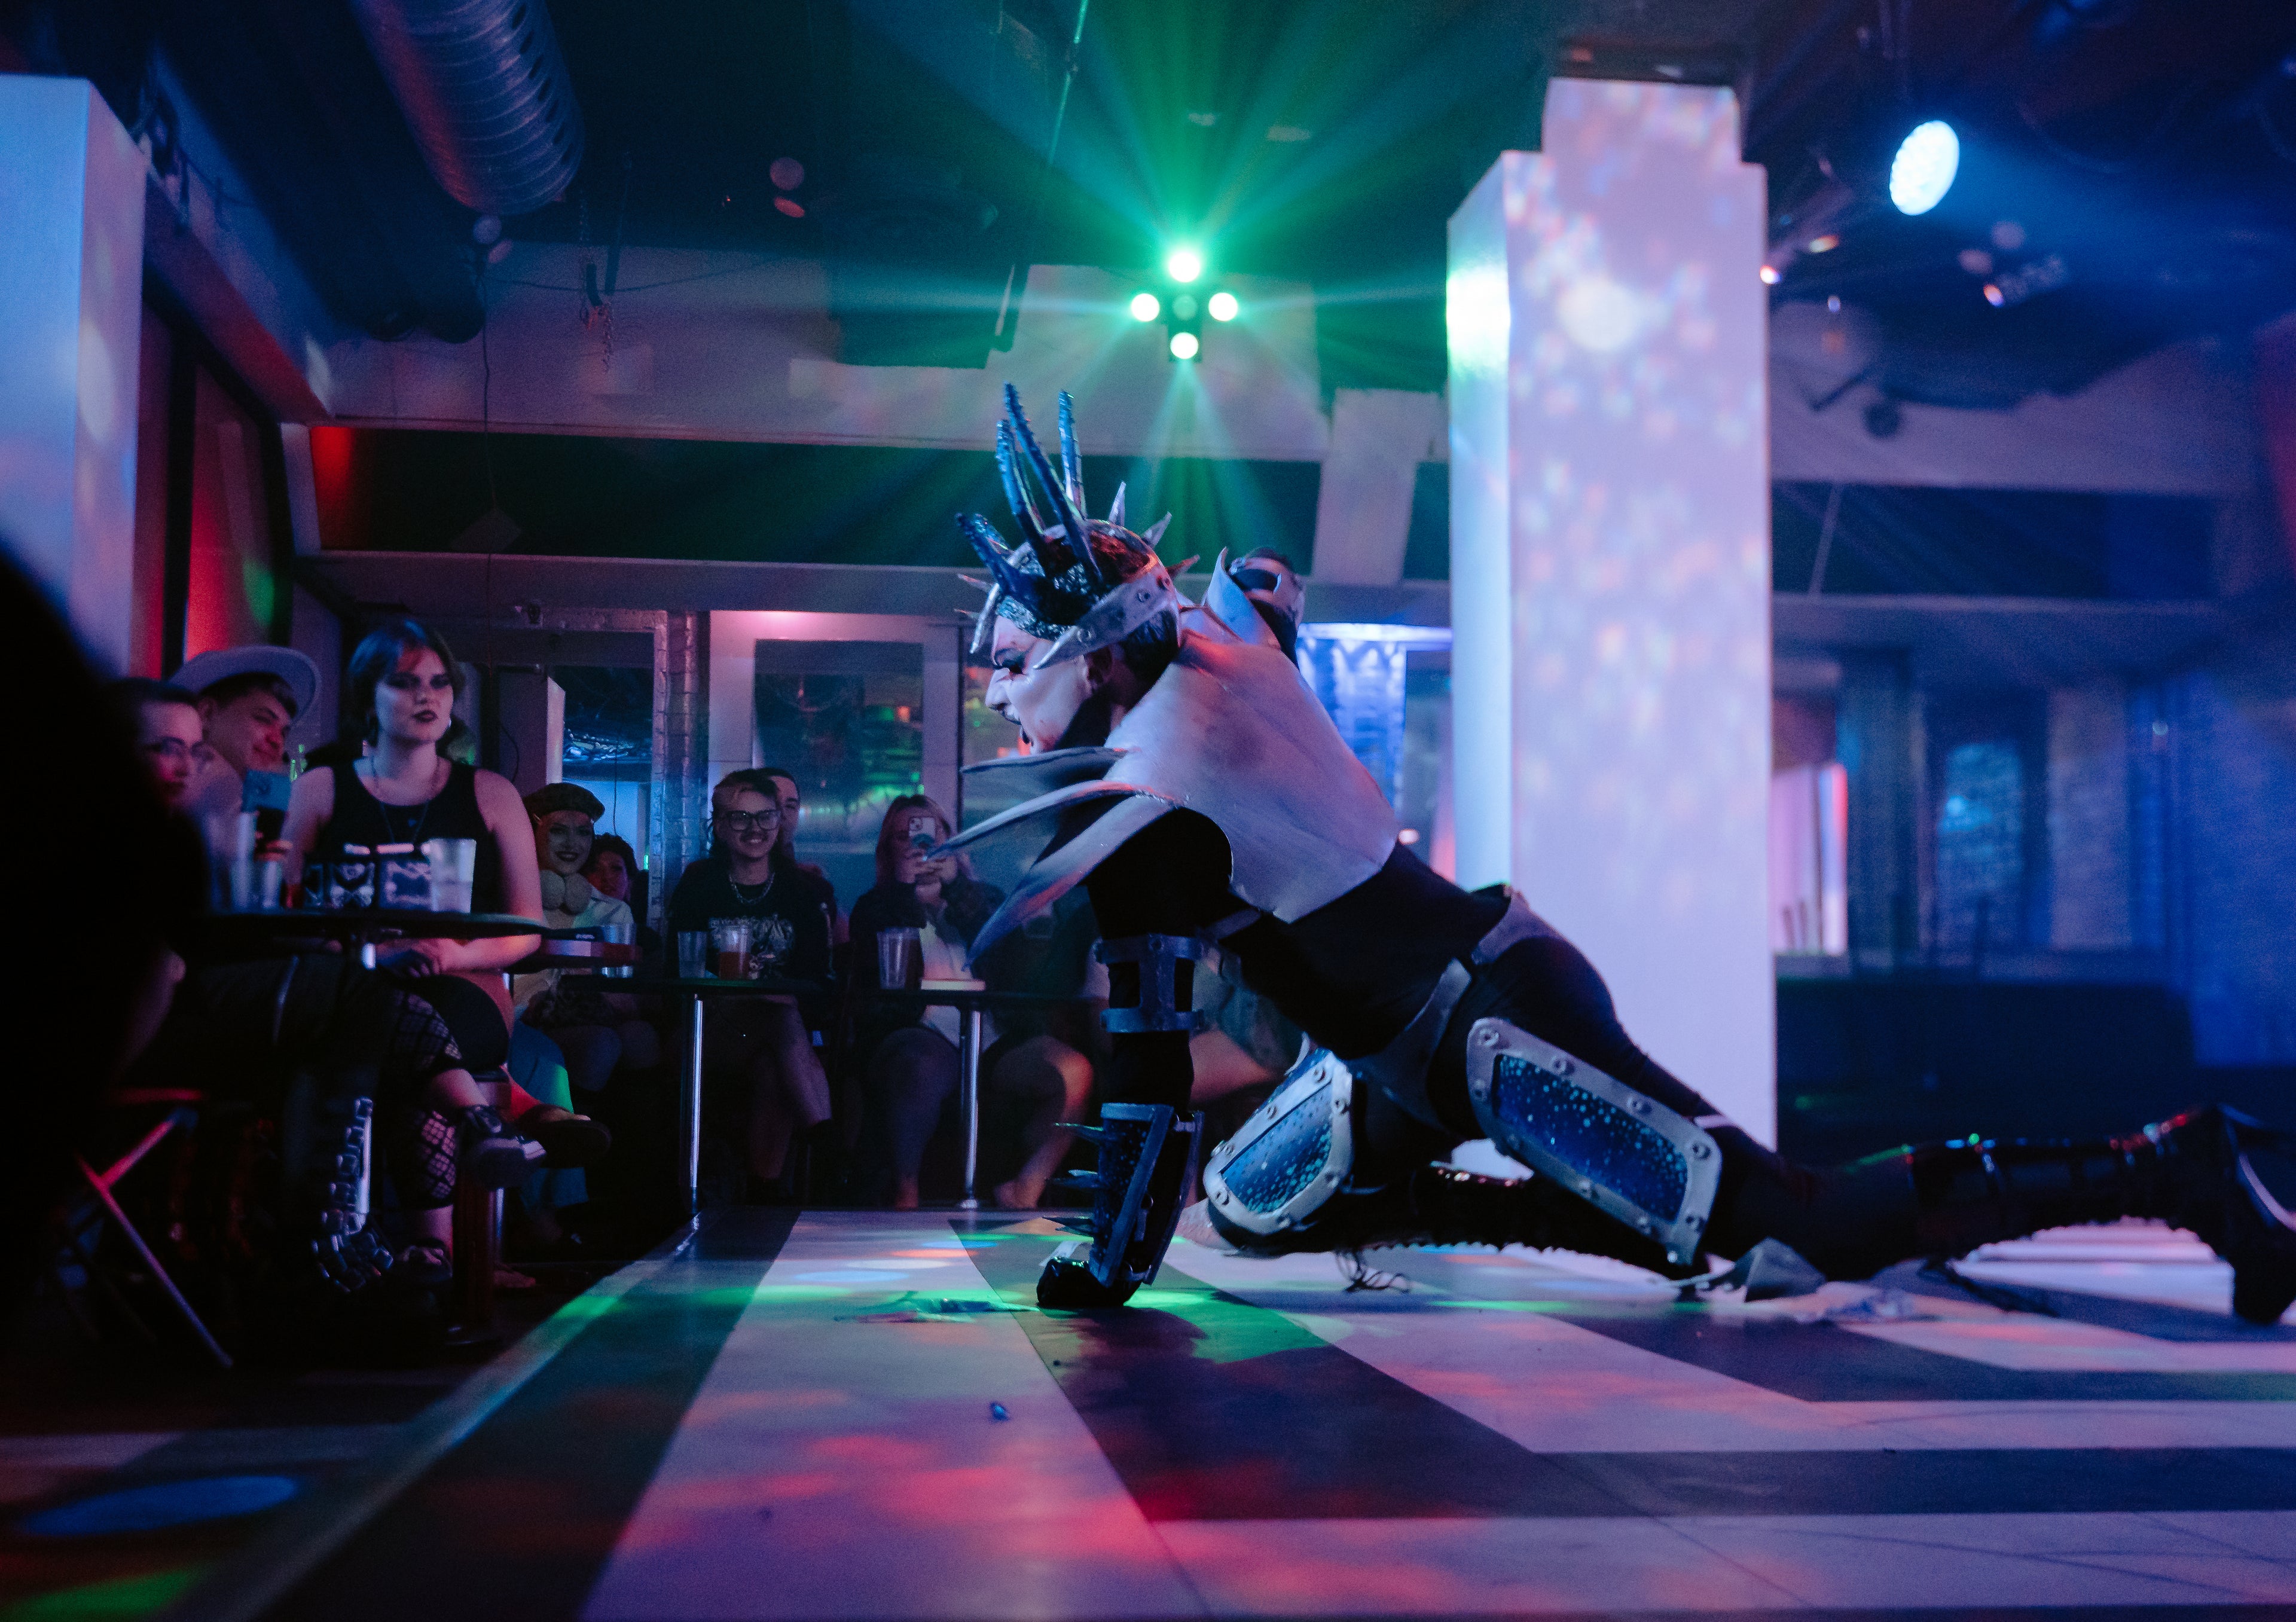 Emmonia performing floor work on the stage at Evolution Wonderlounge in a spiked outfit